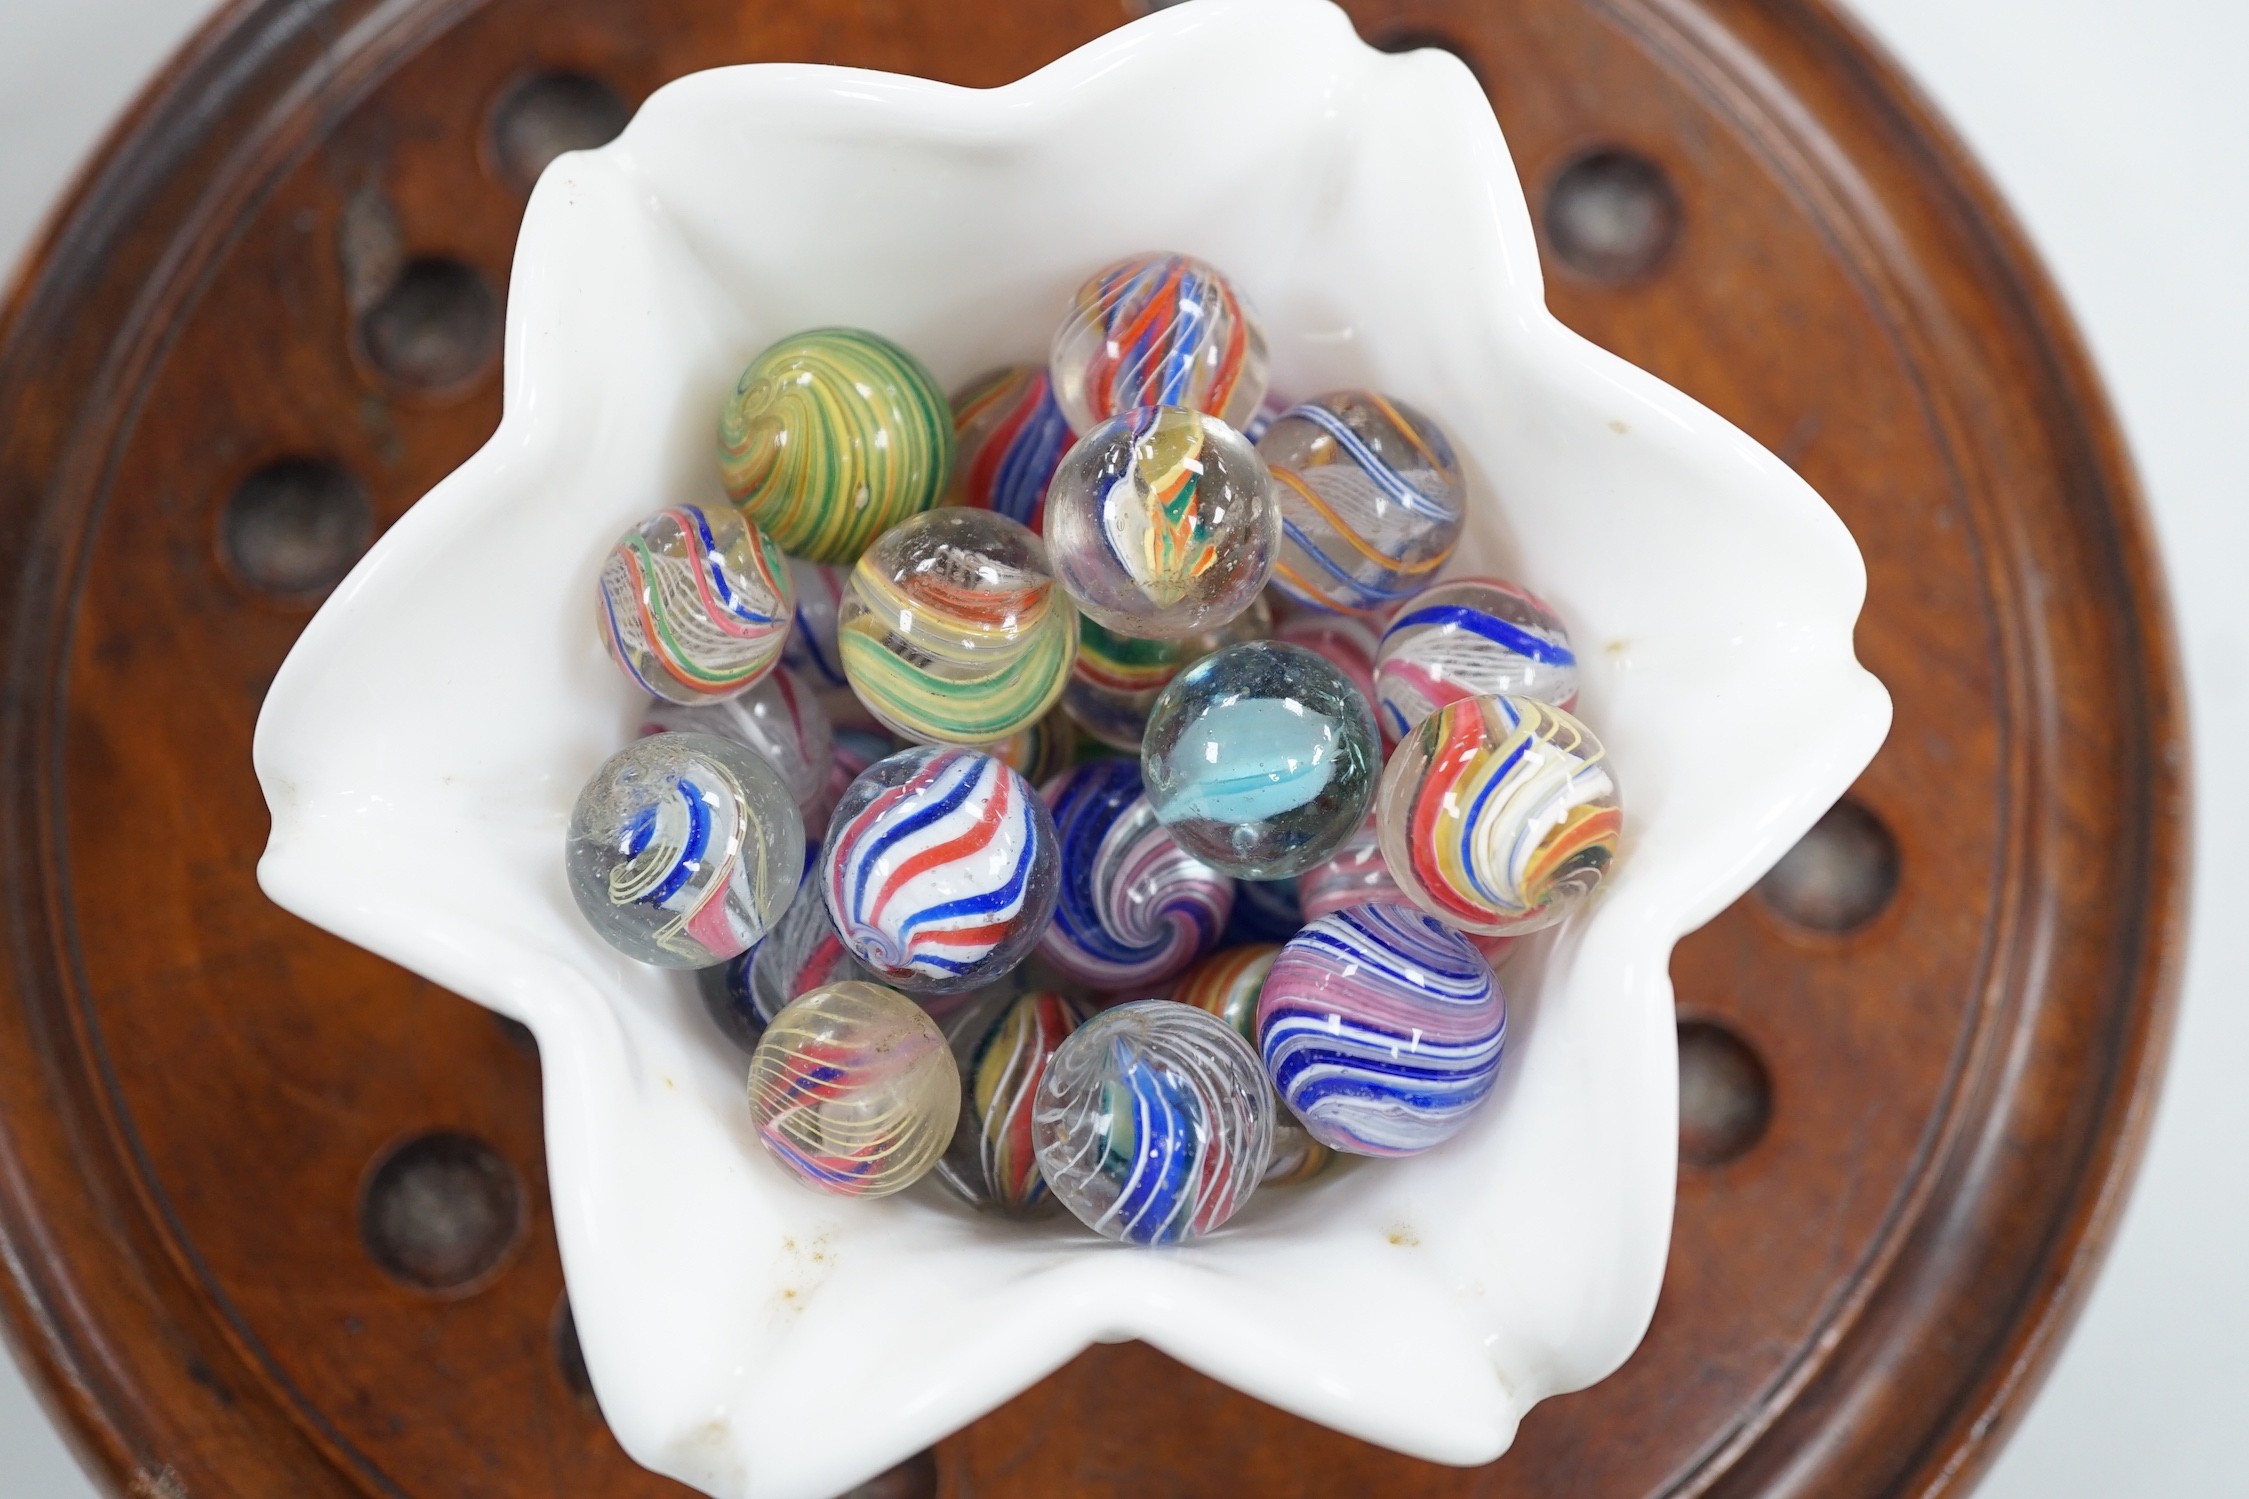 A mahogany solitaire board with a collection of latticino and marbled glass marbles